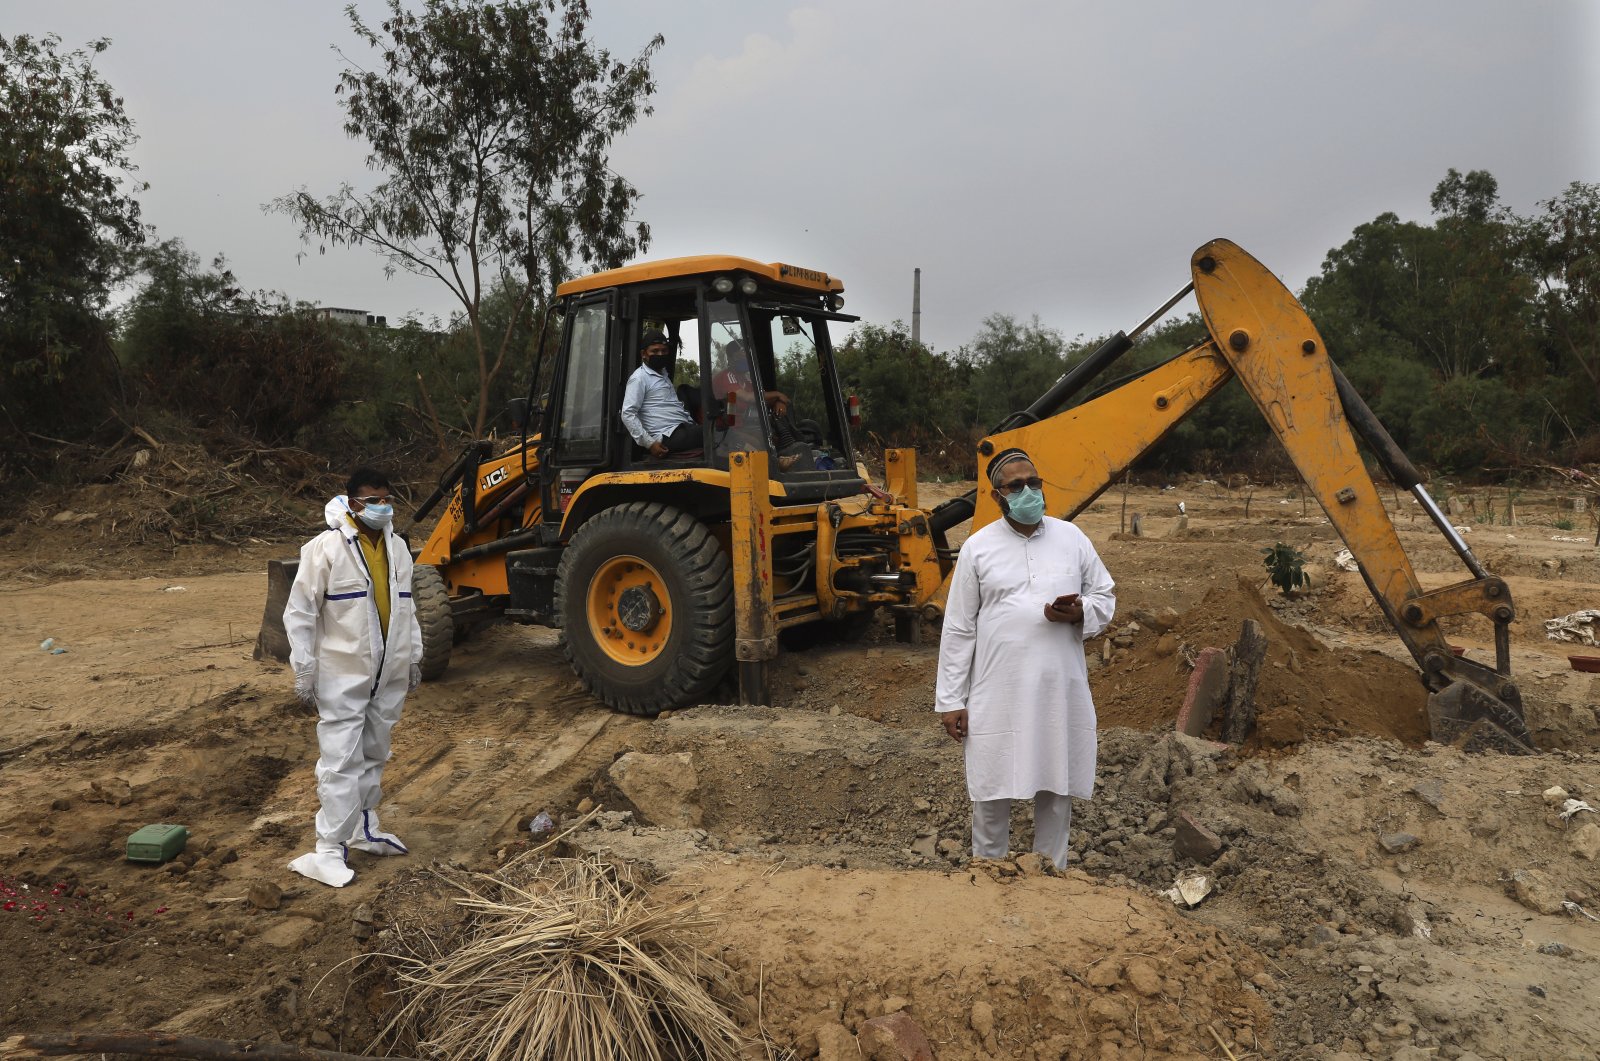 People wait for others to join as an earthmover digs a grave for the burial of a COVID-19 victim at a cemetery in New Delhi, India, June 5, 2020. (AP Photo)